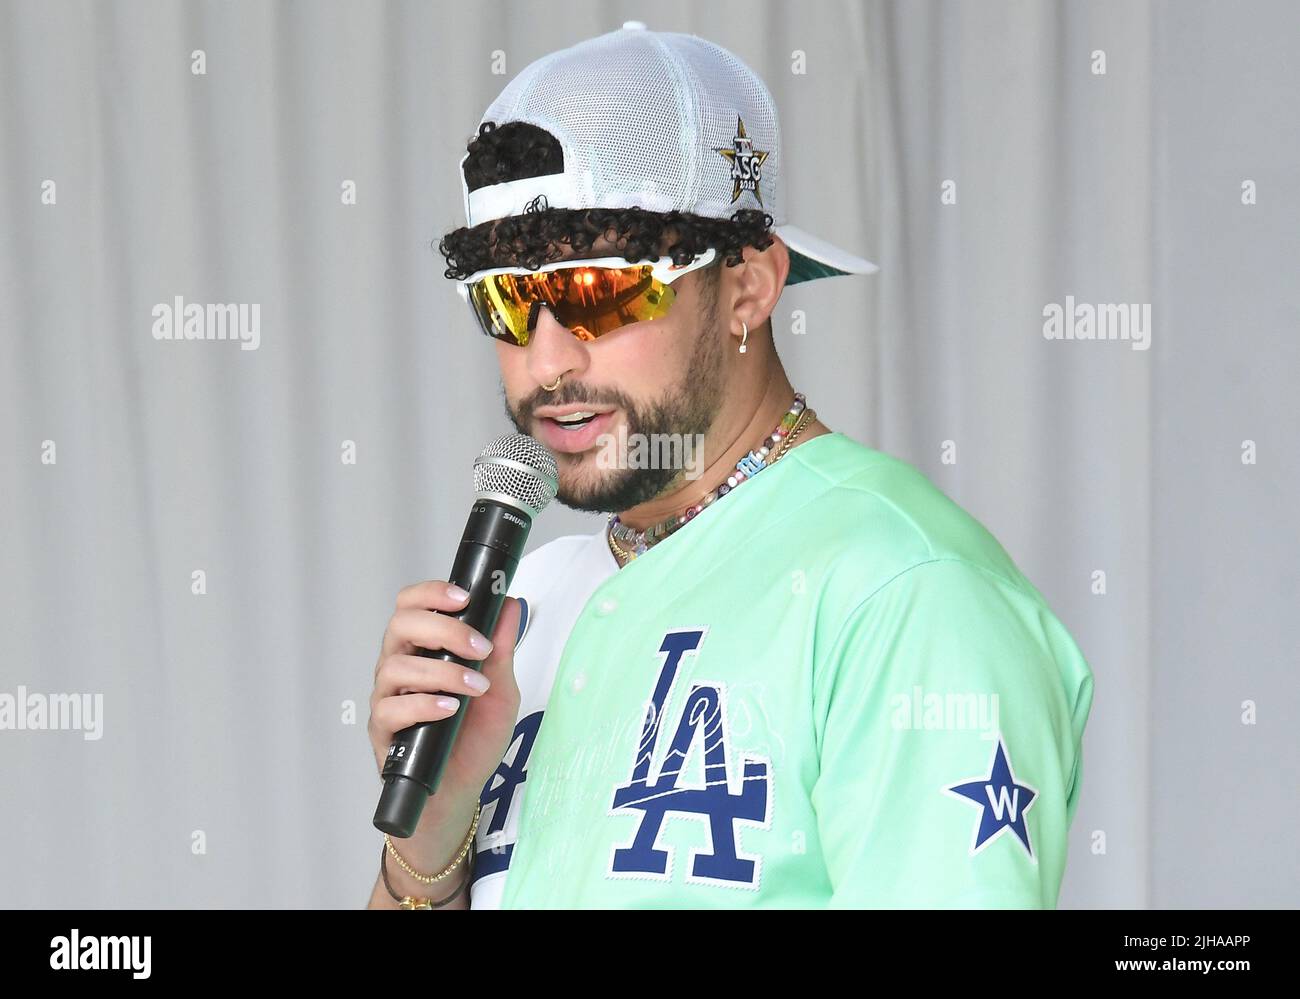 Los Angeles, USA. 16th July, 2022. Bad Bunny at the 2022 MLB All-Star  Celebrity Softball Game Media Availability held at the 76 Station - Dodger  Stadium Parking Lot in Los Angeles, CA